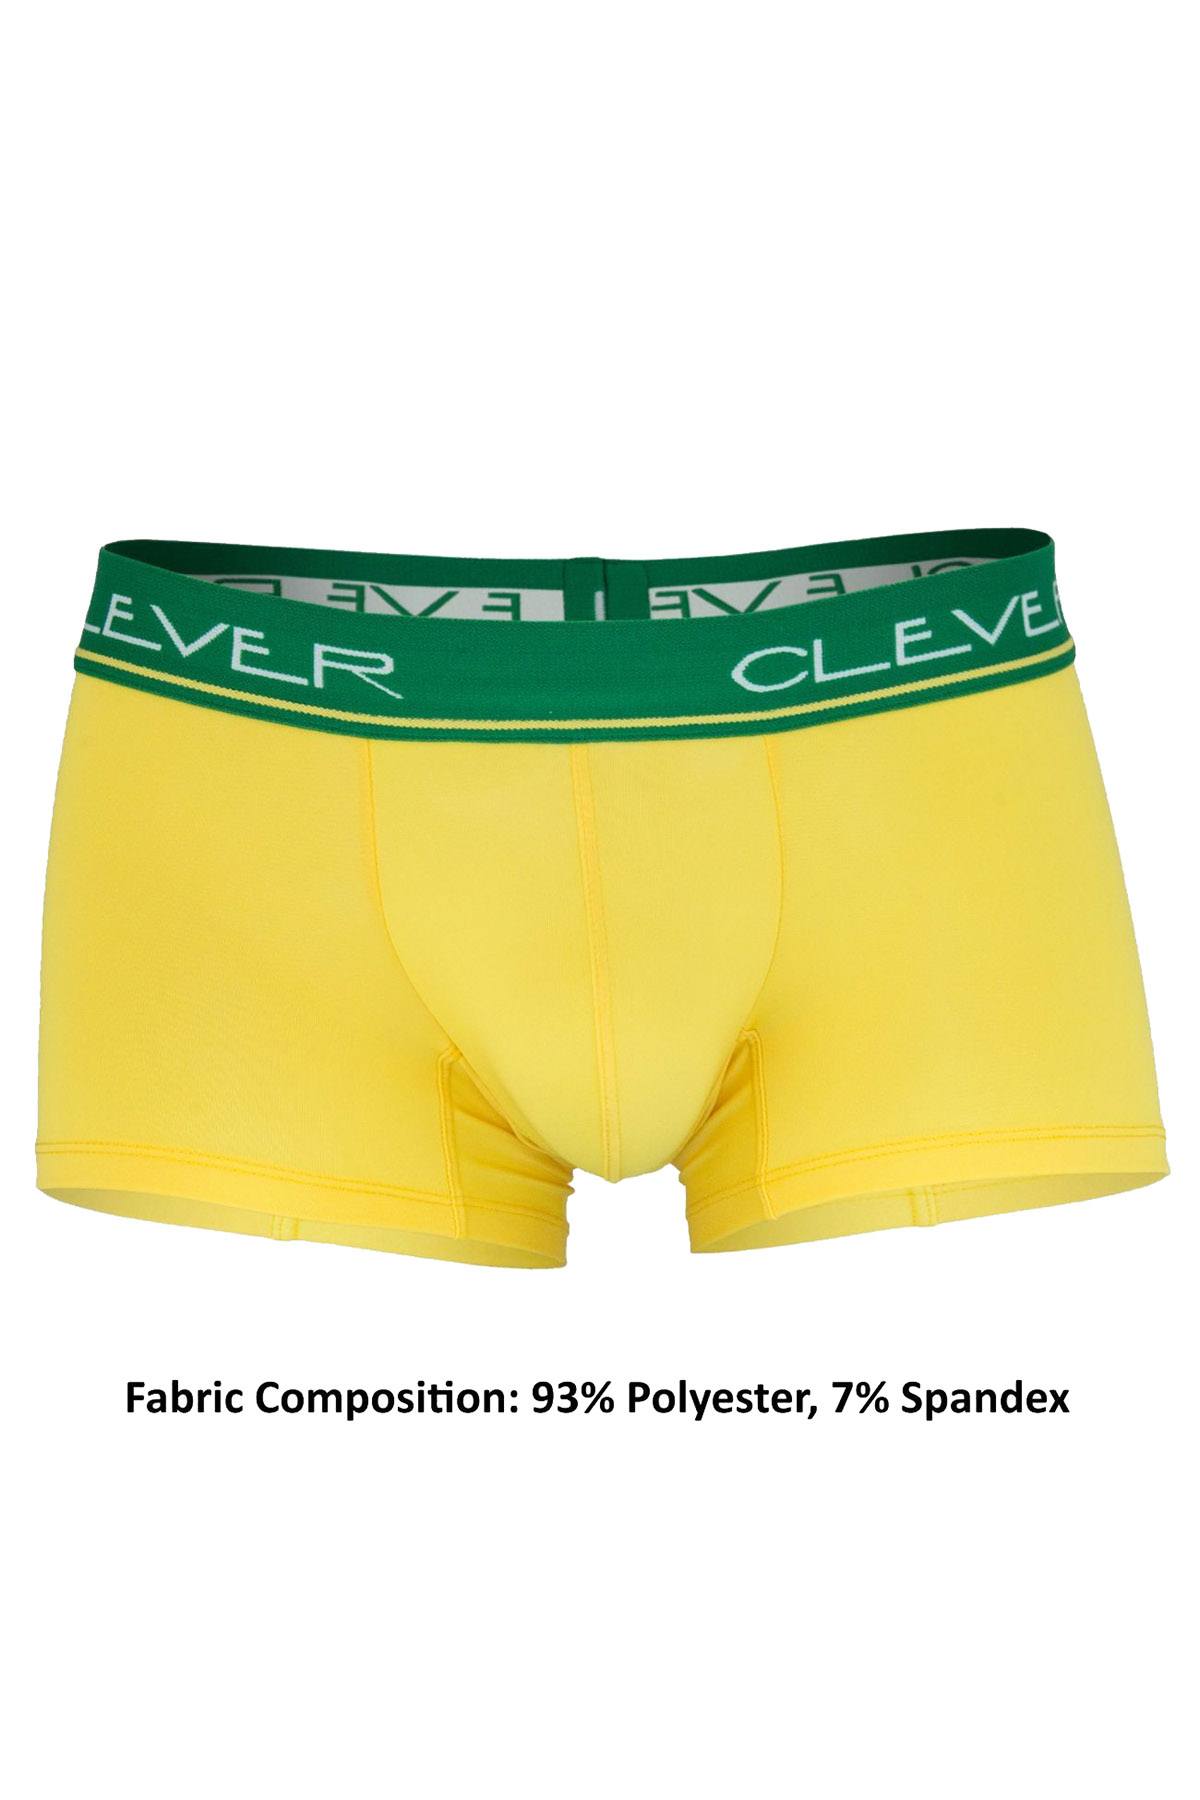 Clever Yellow/Green Limited Edition Trunk